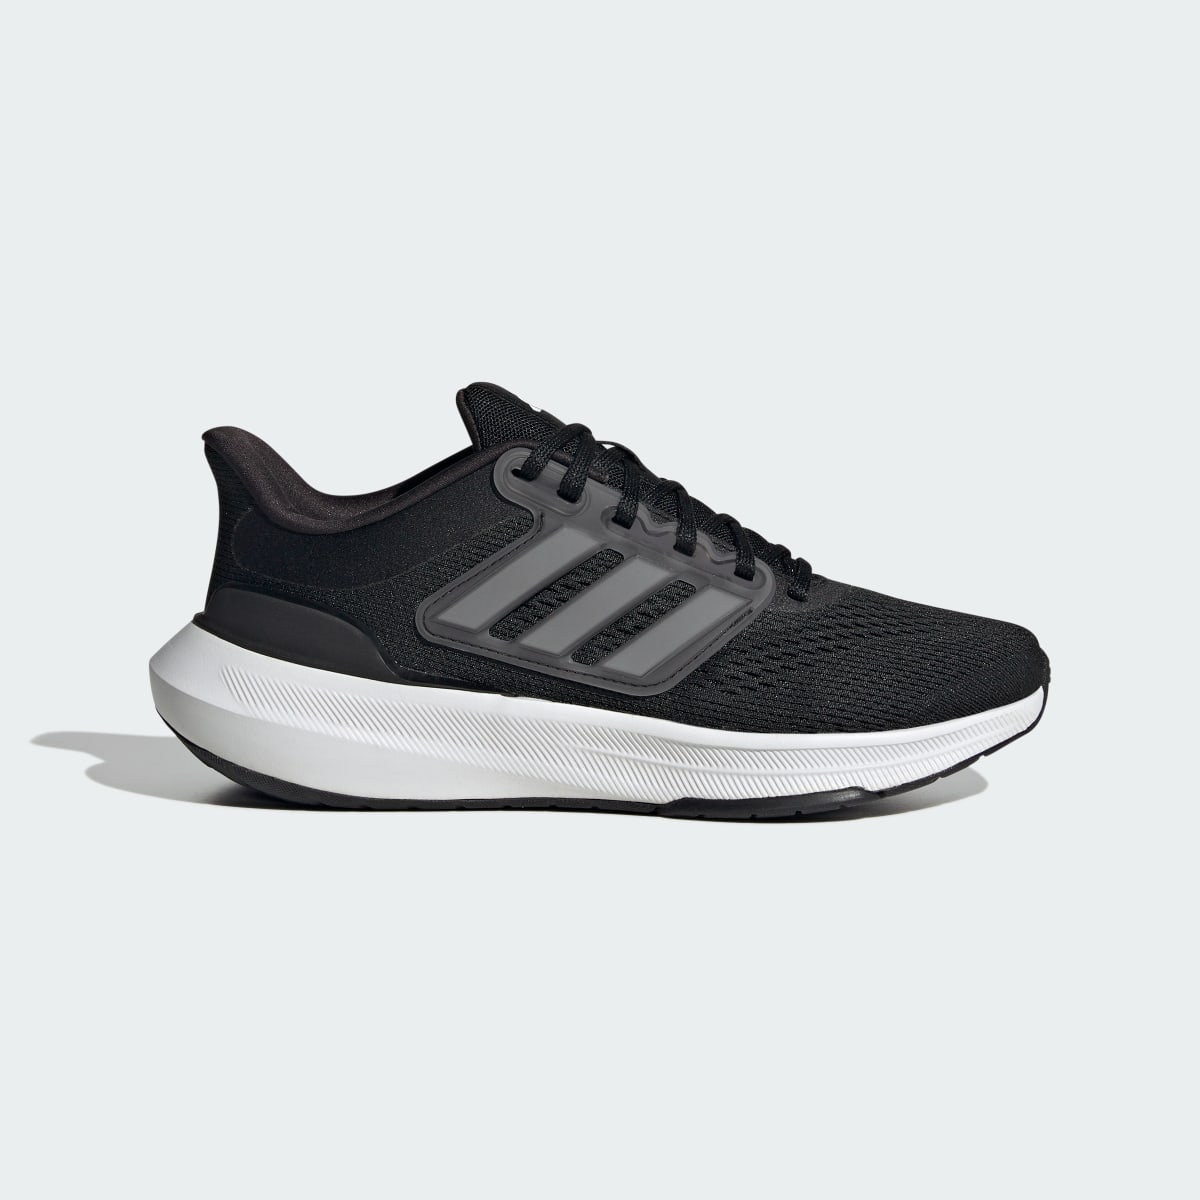 Adidas Ultrabounce Wide Running Shoes. 4